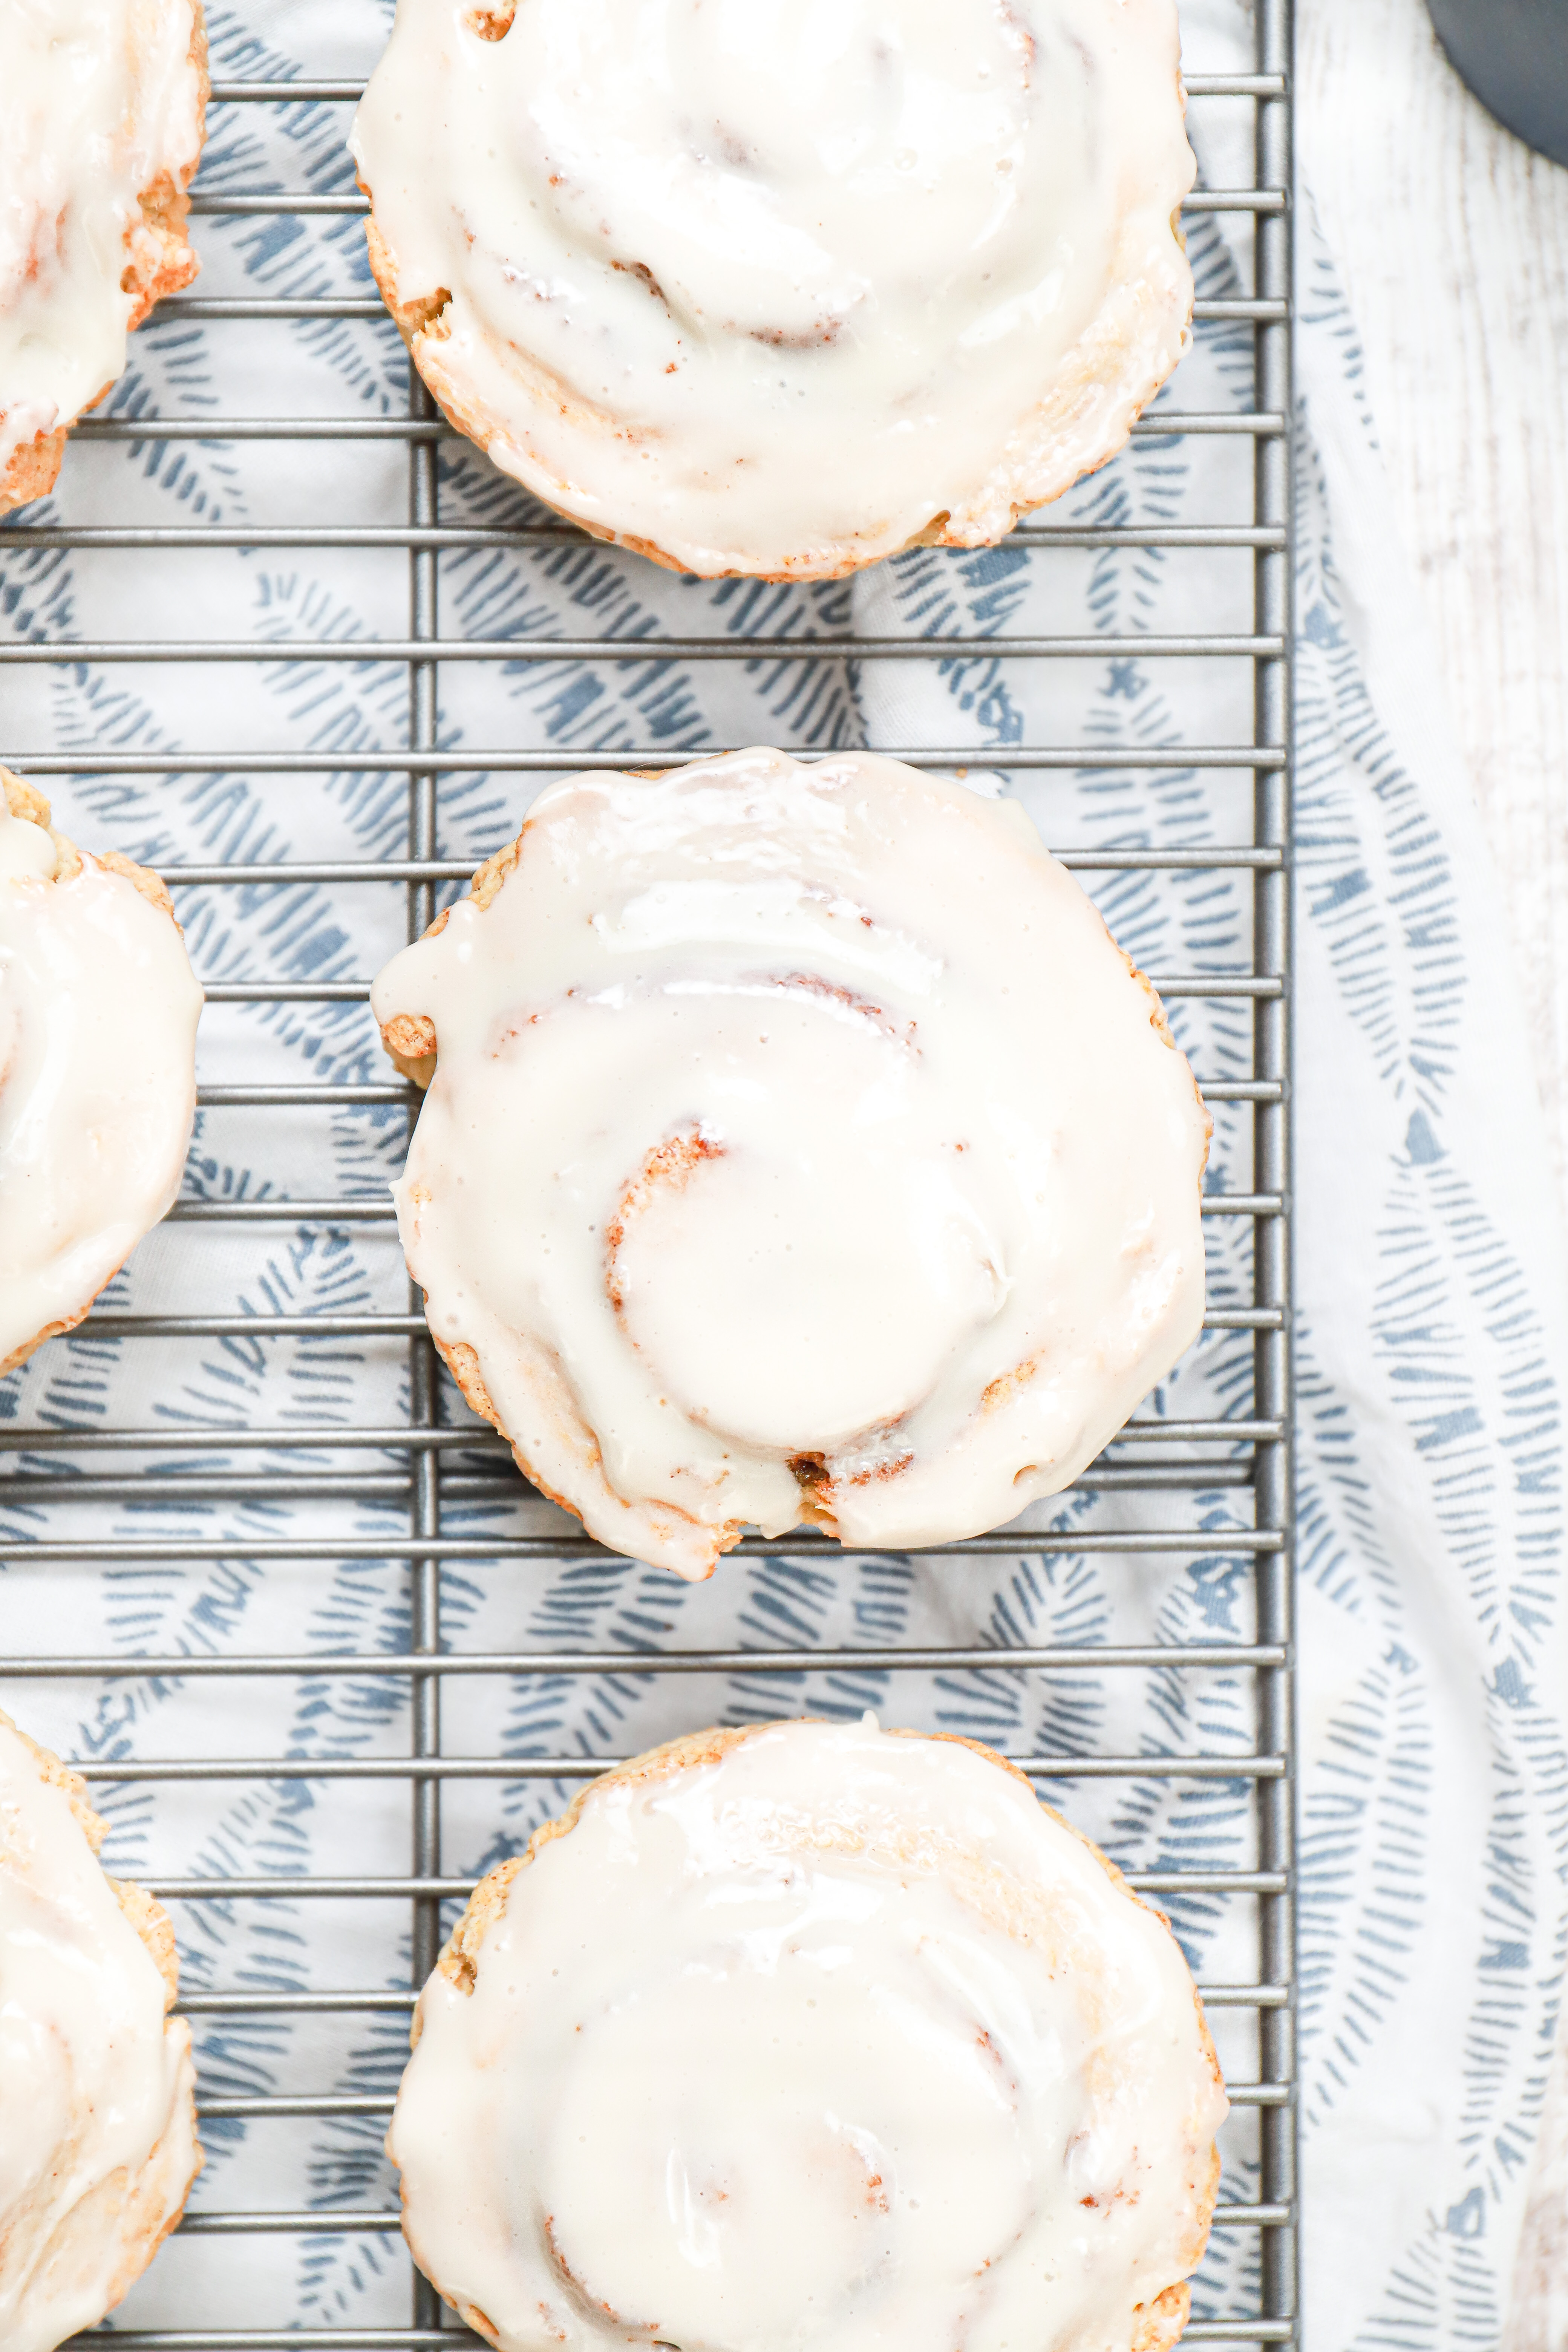 Overhead up close view of a cream cheese glazed cinnamon roll scone on a wire cooling rack on top of a white and blue towel.